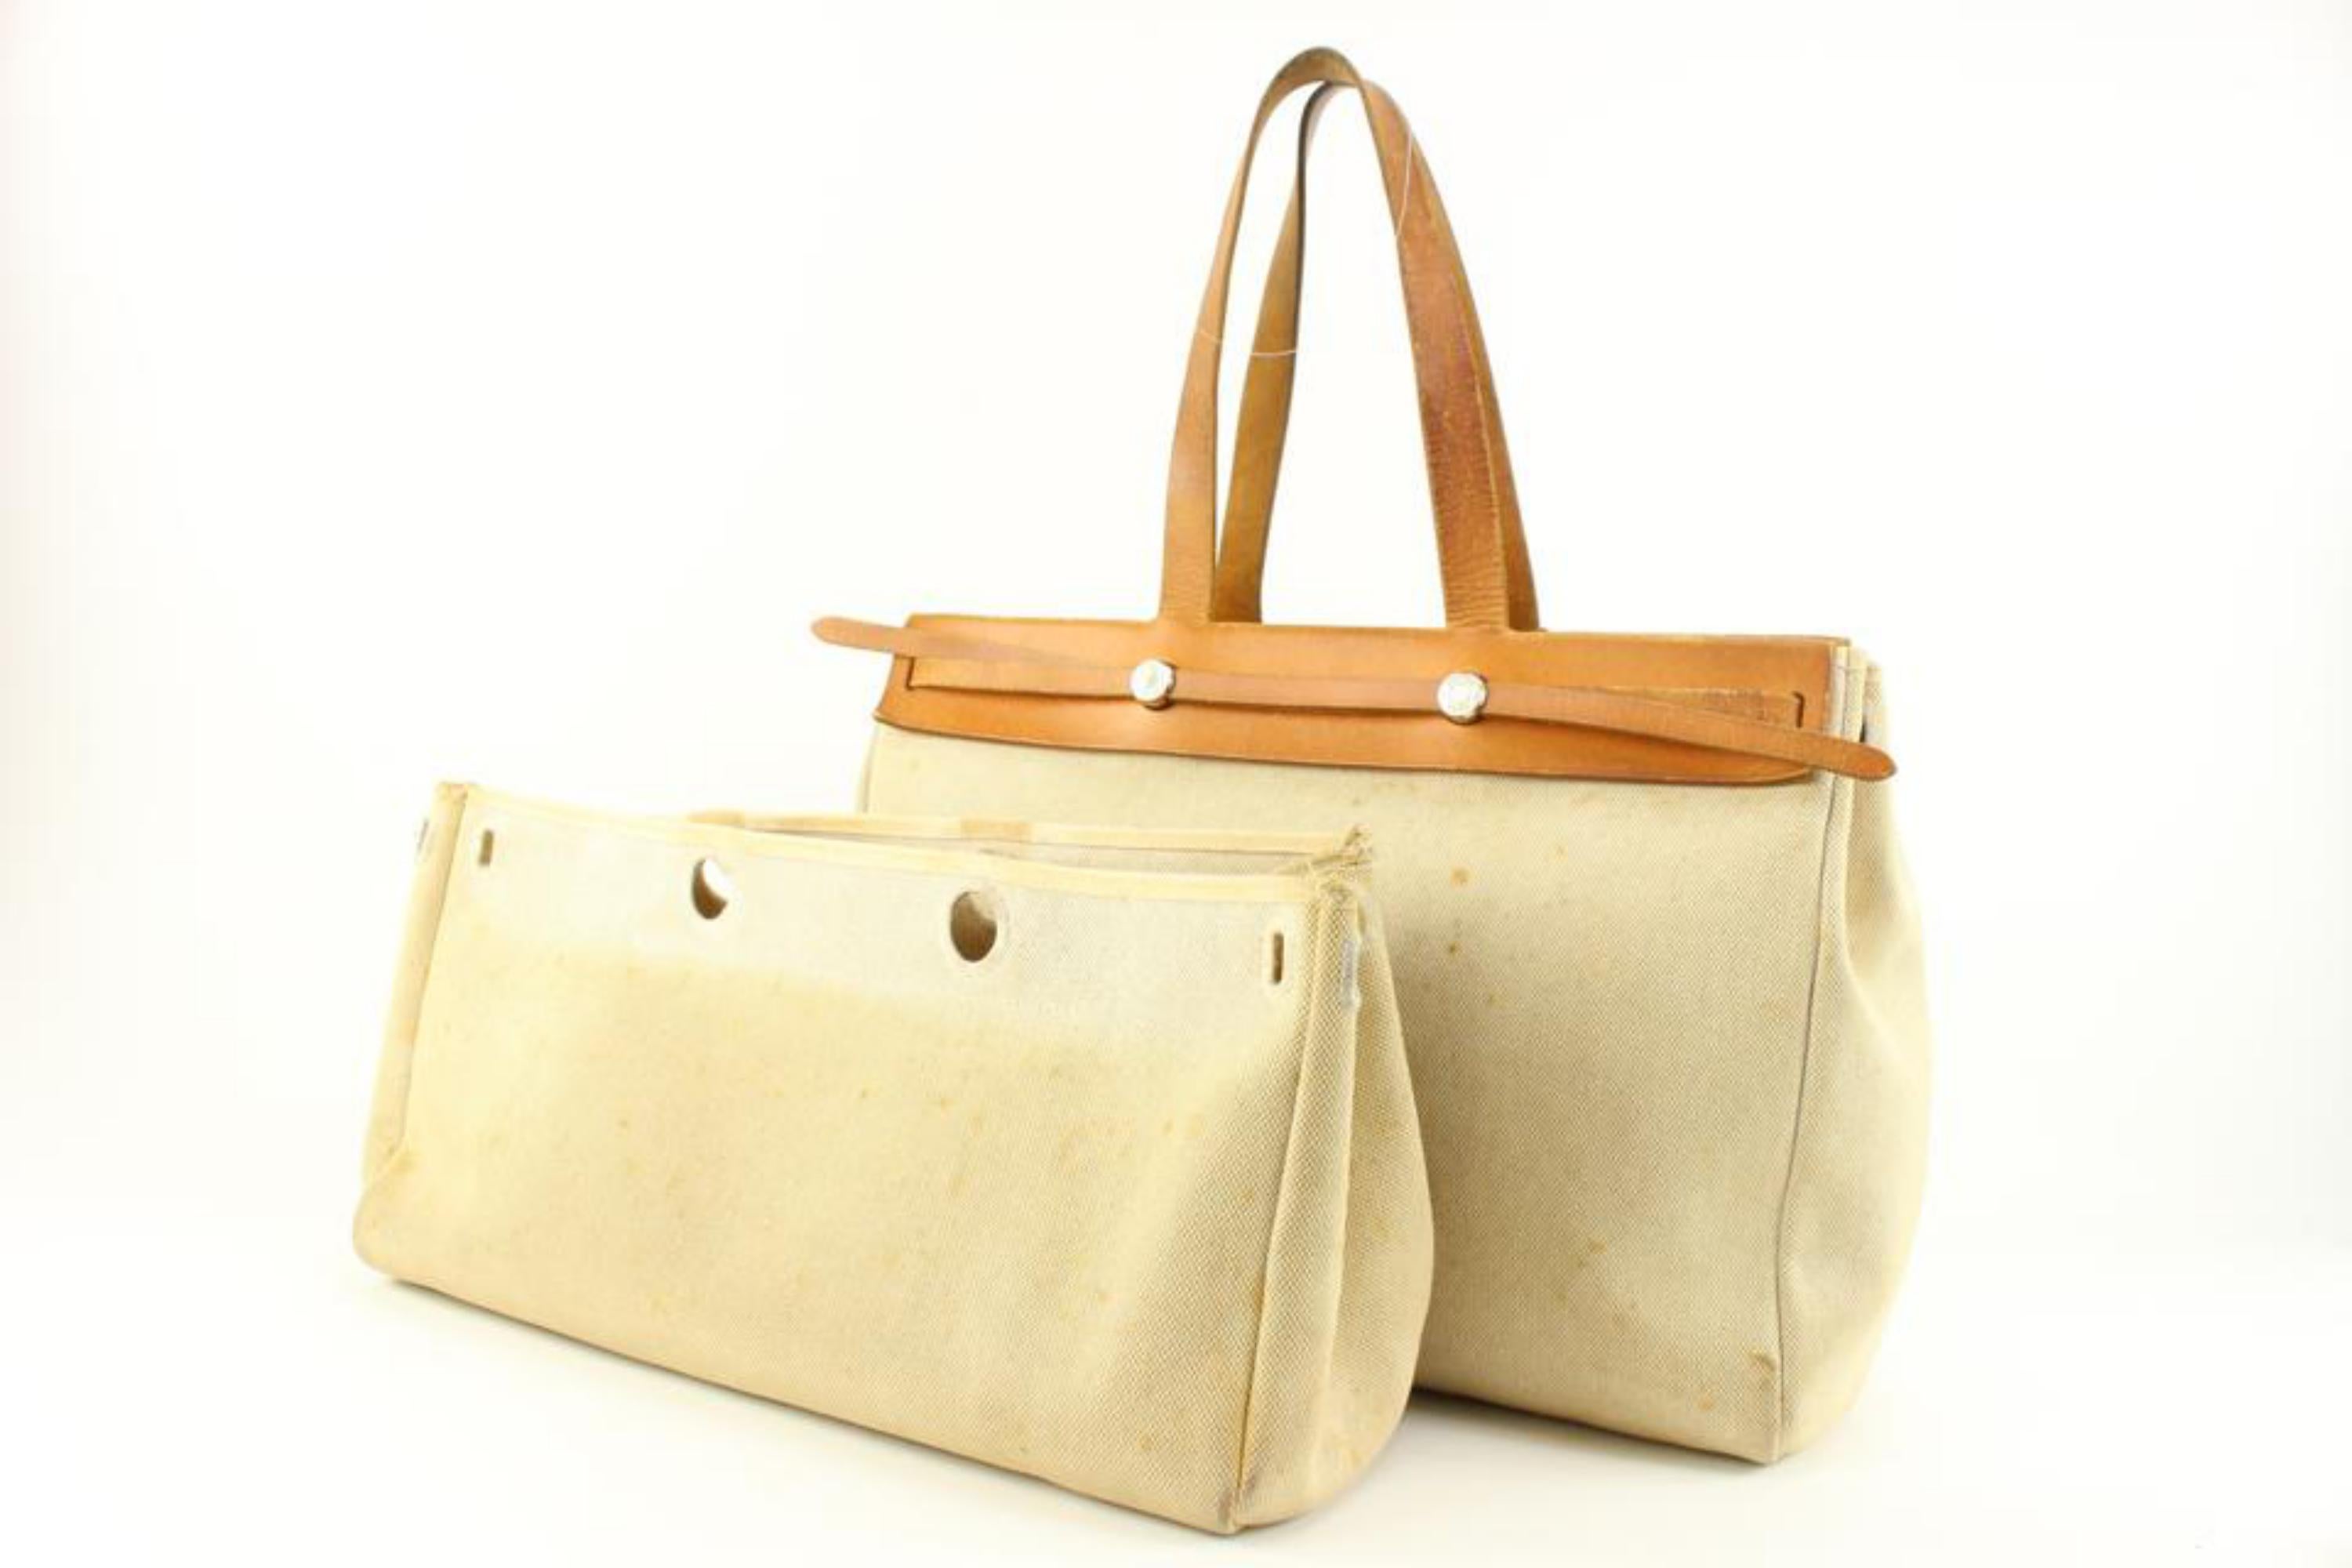 Hermès Natural Toile and Vache Calfskin Leather Herbag Cabas 50 2-in-1 13h52
Date Code/Serial Number: F in a Square
Made In: France
Measurements: Length:  20